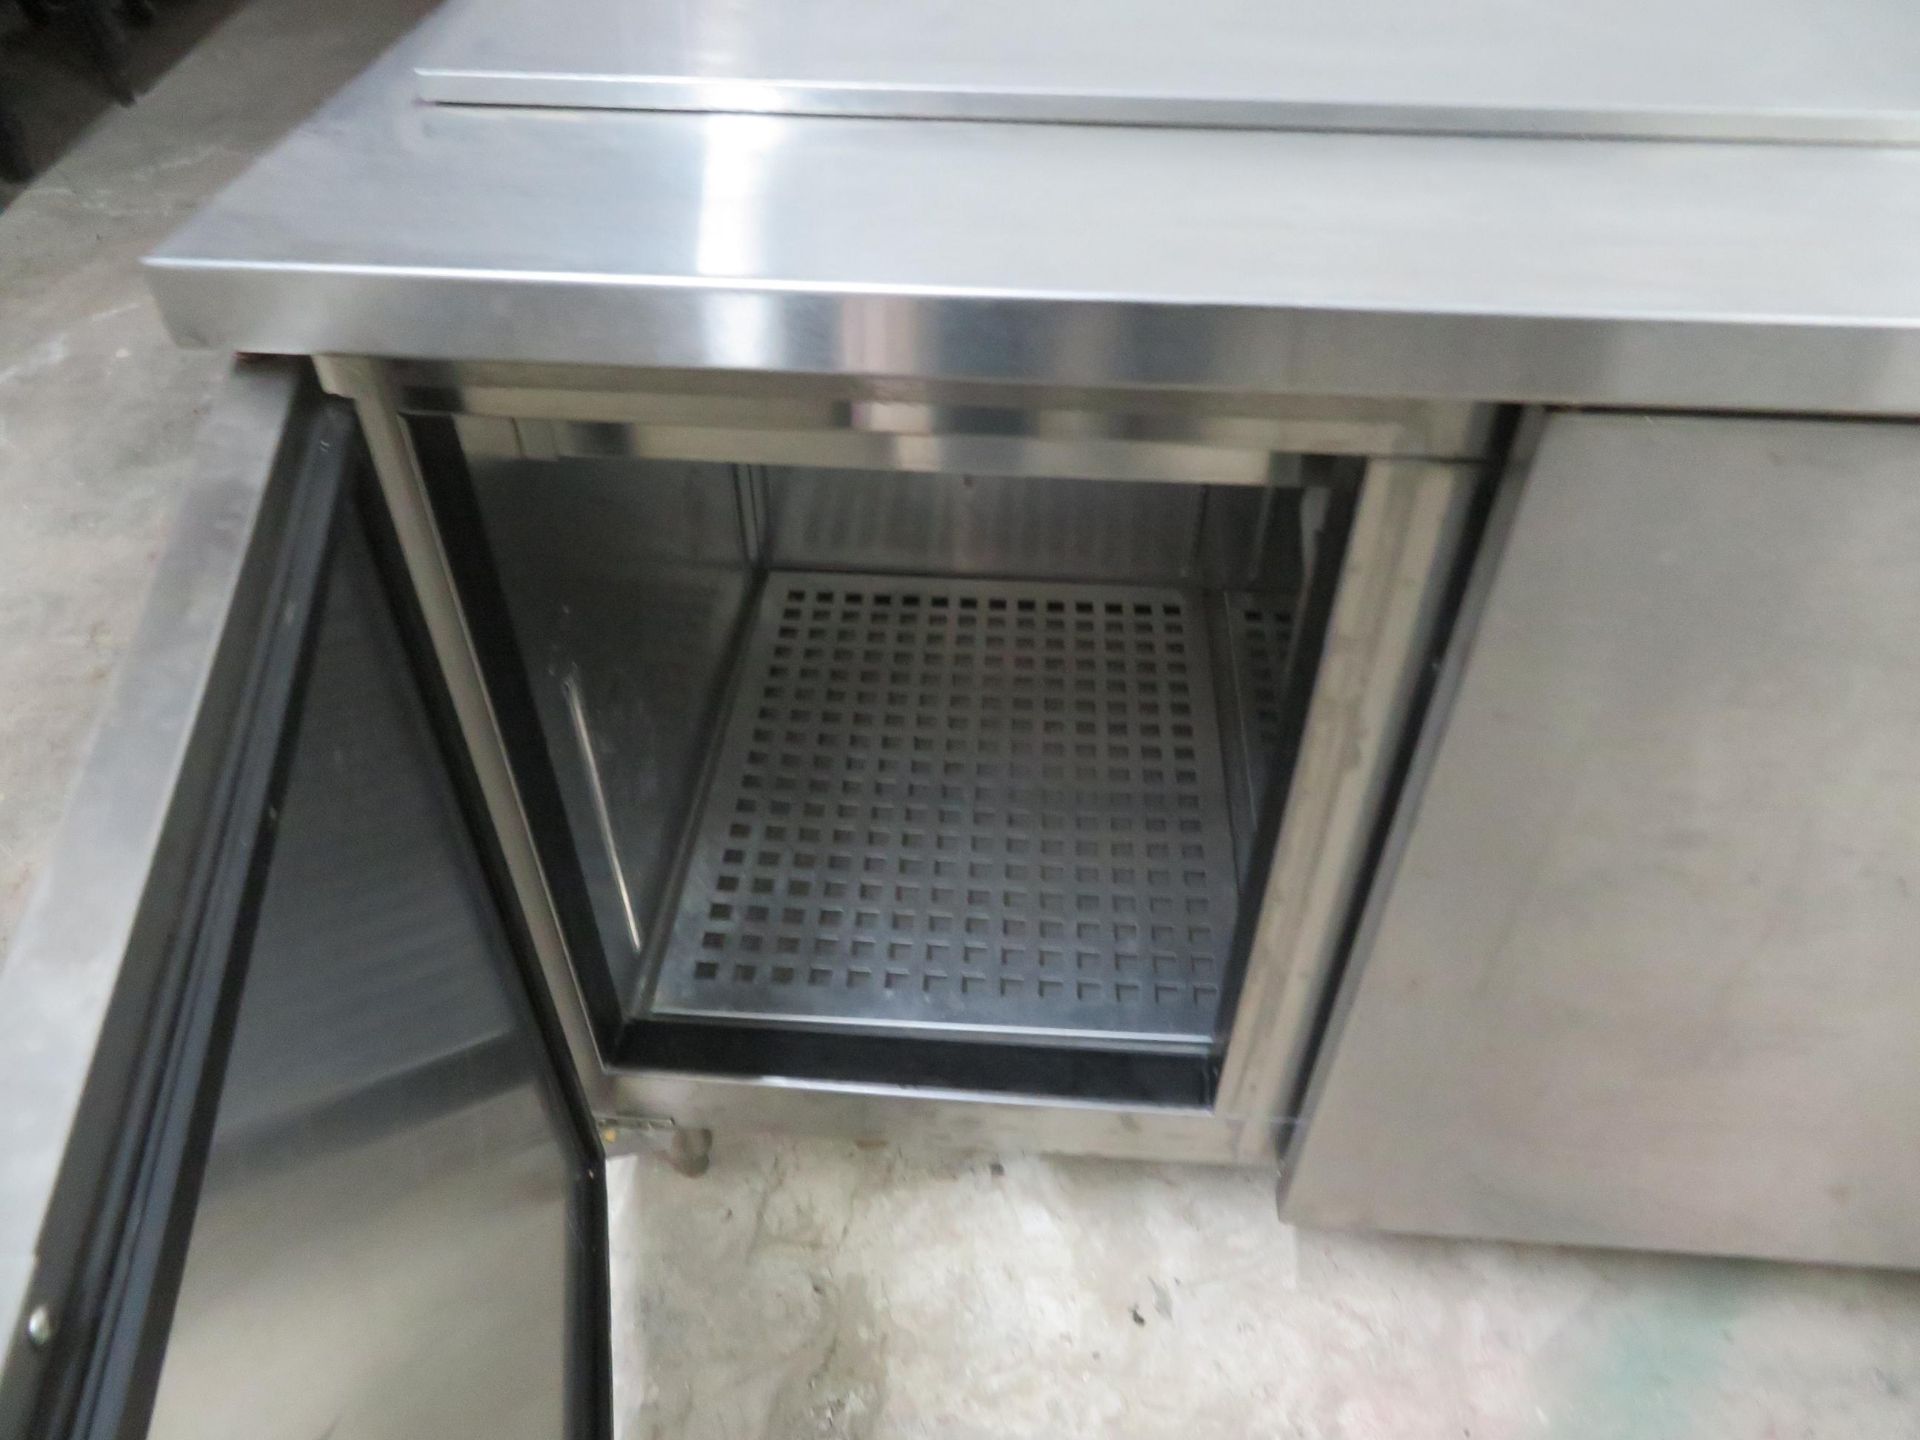 INOX FAB 3 door stainless steel refrigerated table, Mod # TSBCI-84-32 approx. 84"w x32"d x 36"h - Image 2 of 4